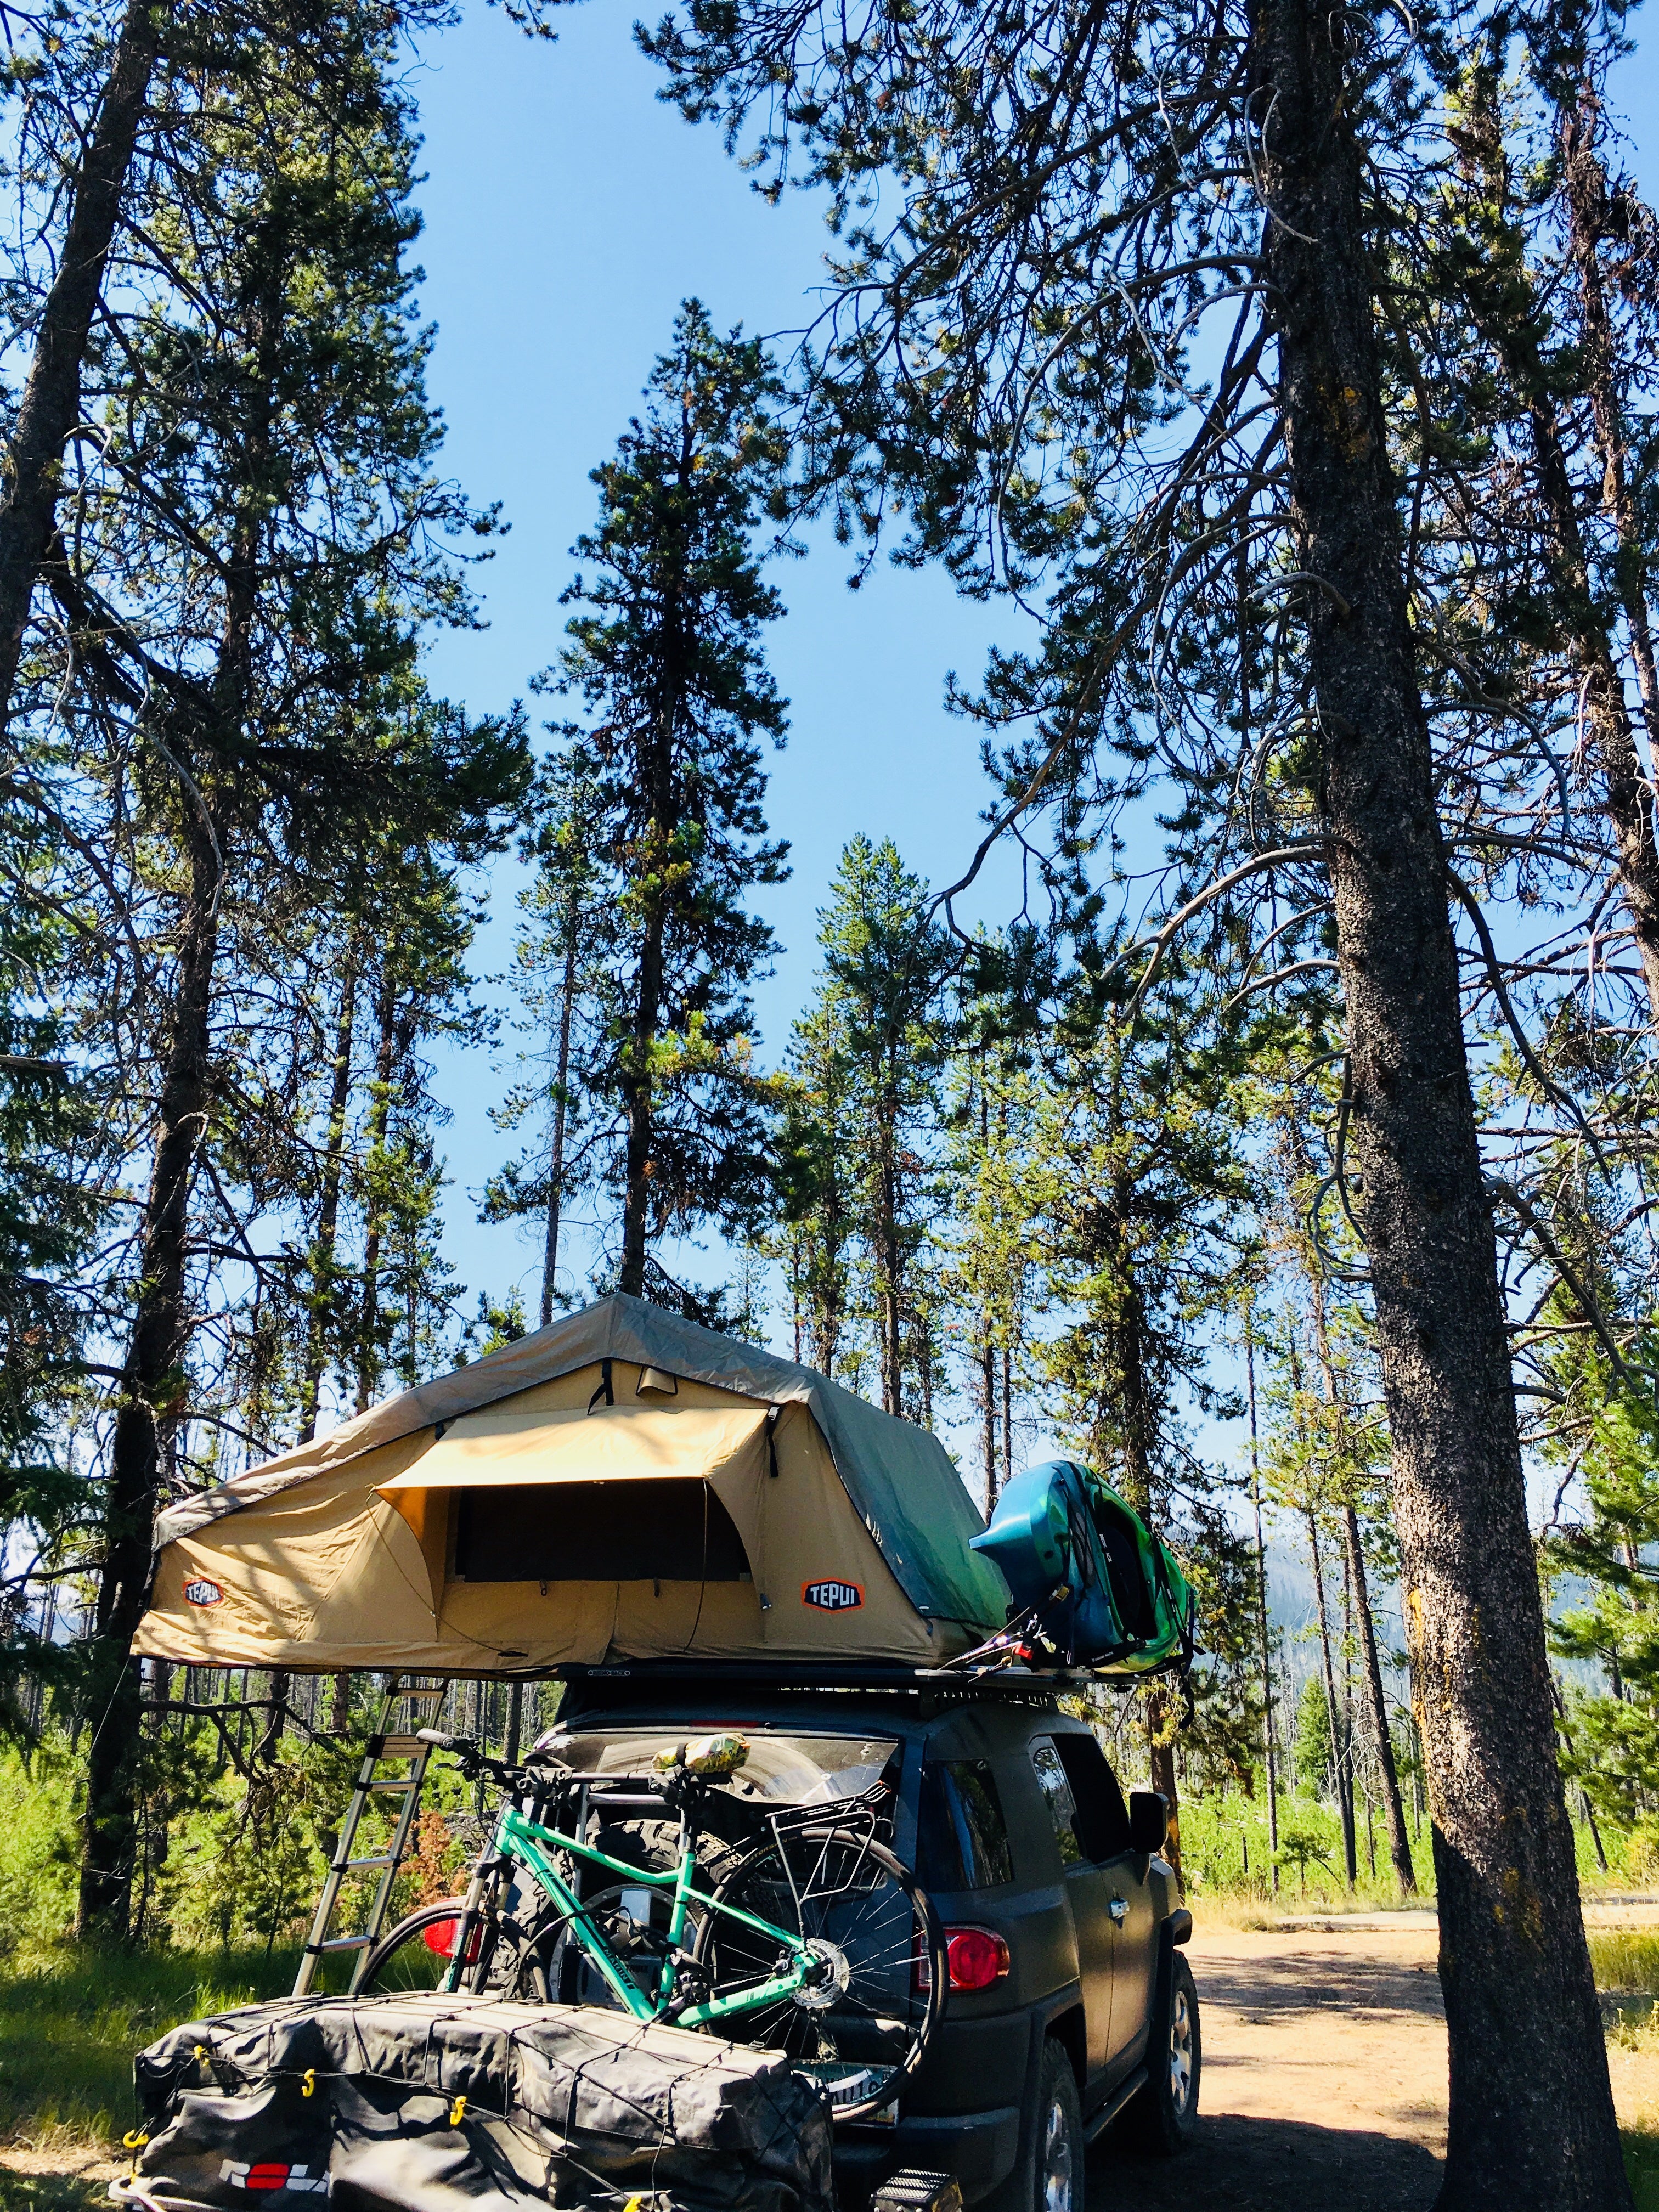 Yellowpine campground, Boise National Forest, Idaho (July 2018)